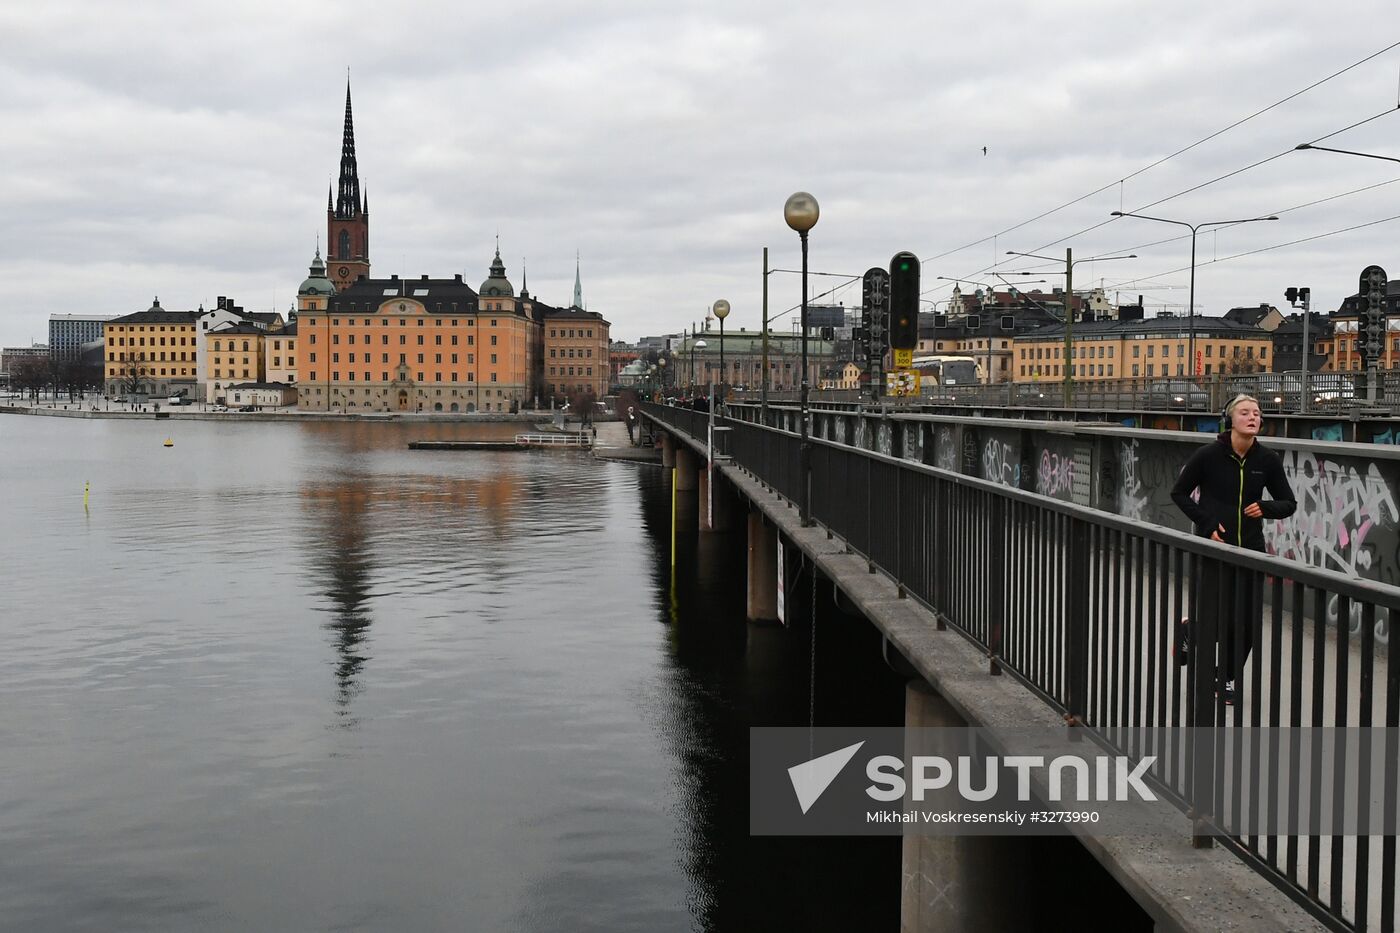 Cities of the world. Stockholm